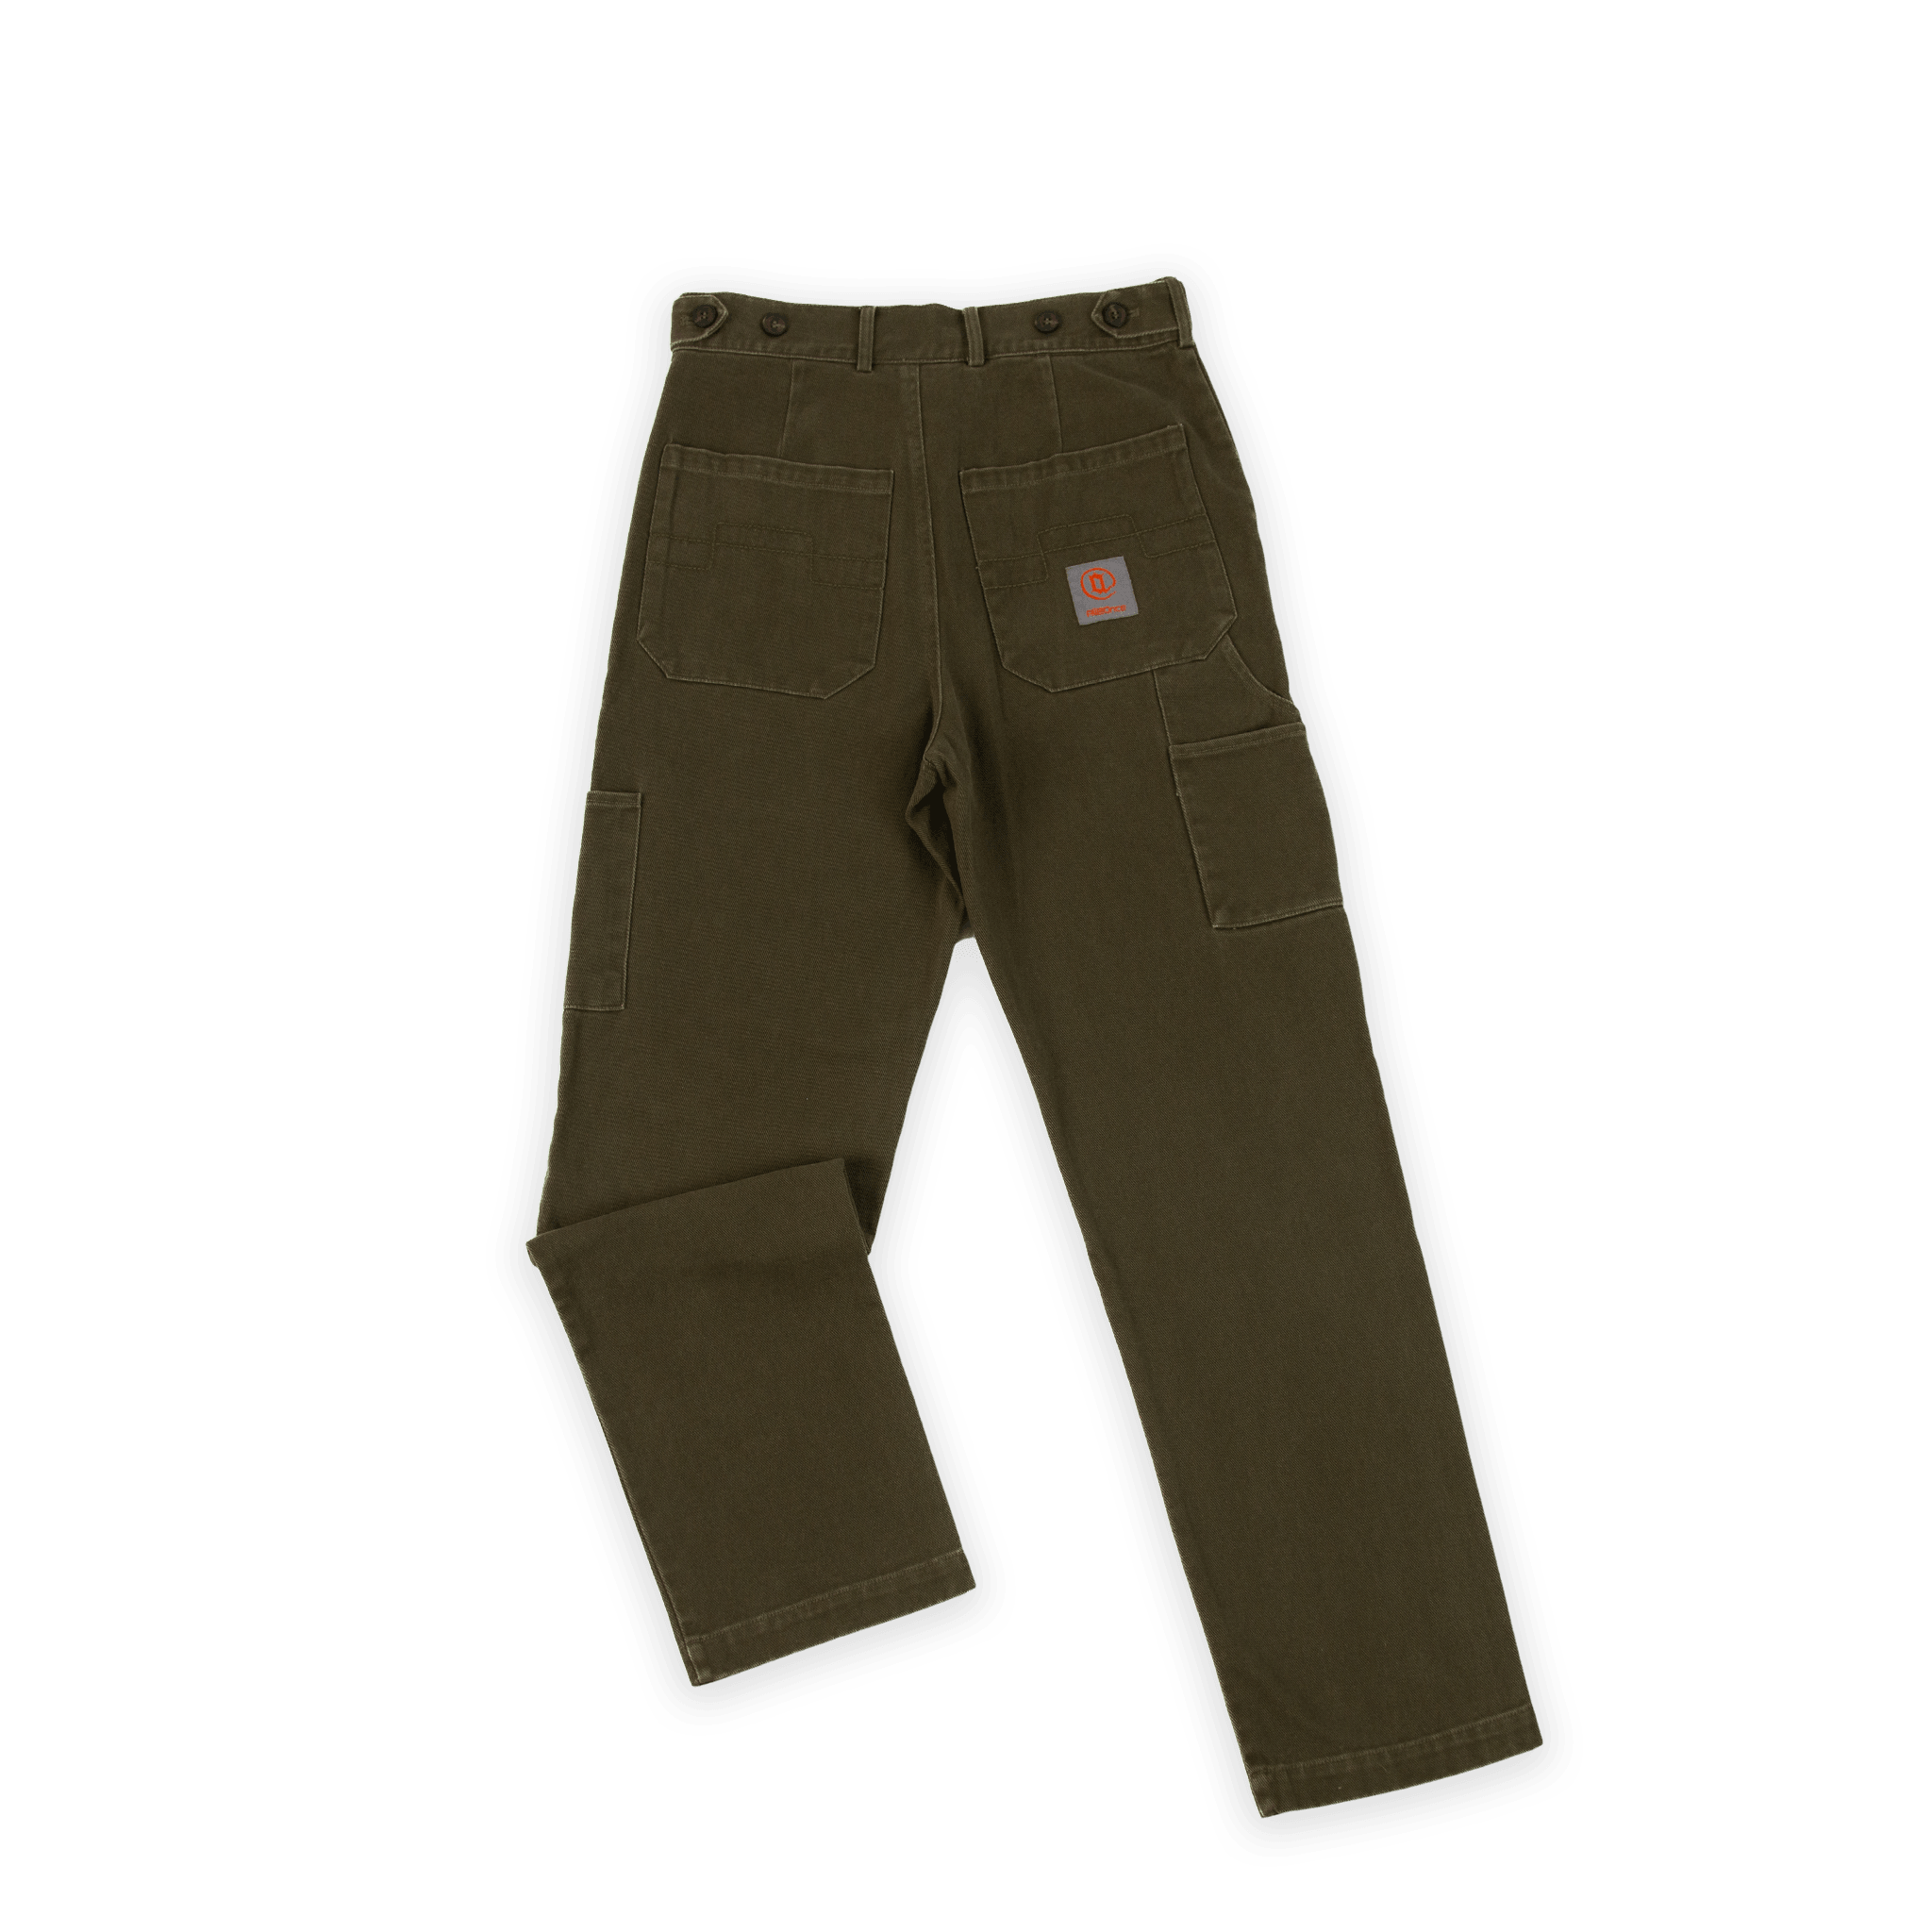 Olive Green Carpenter Pants - All@Once